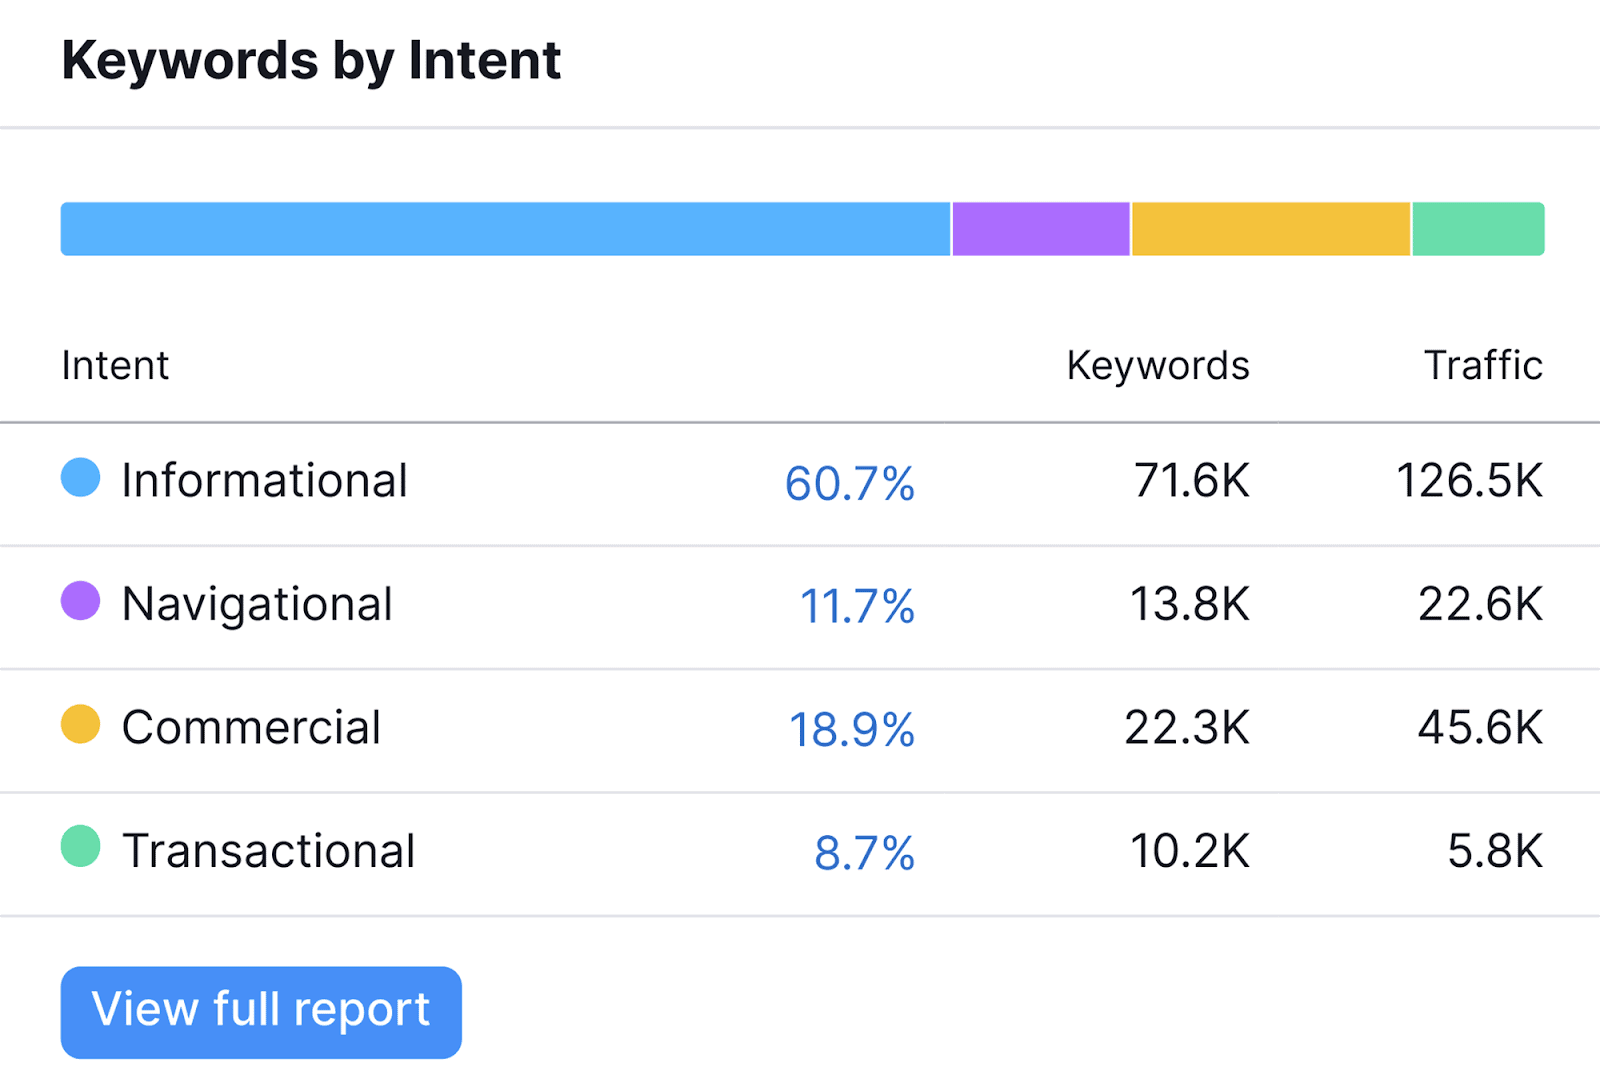 Keywords by Intent